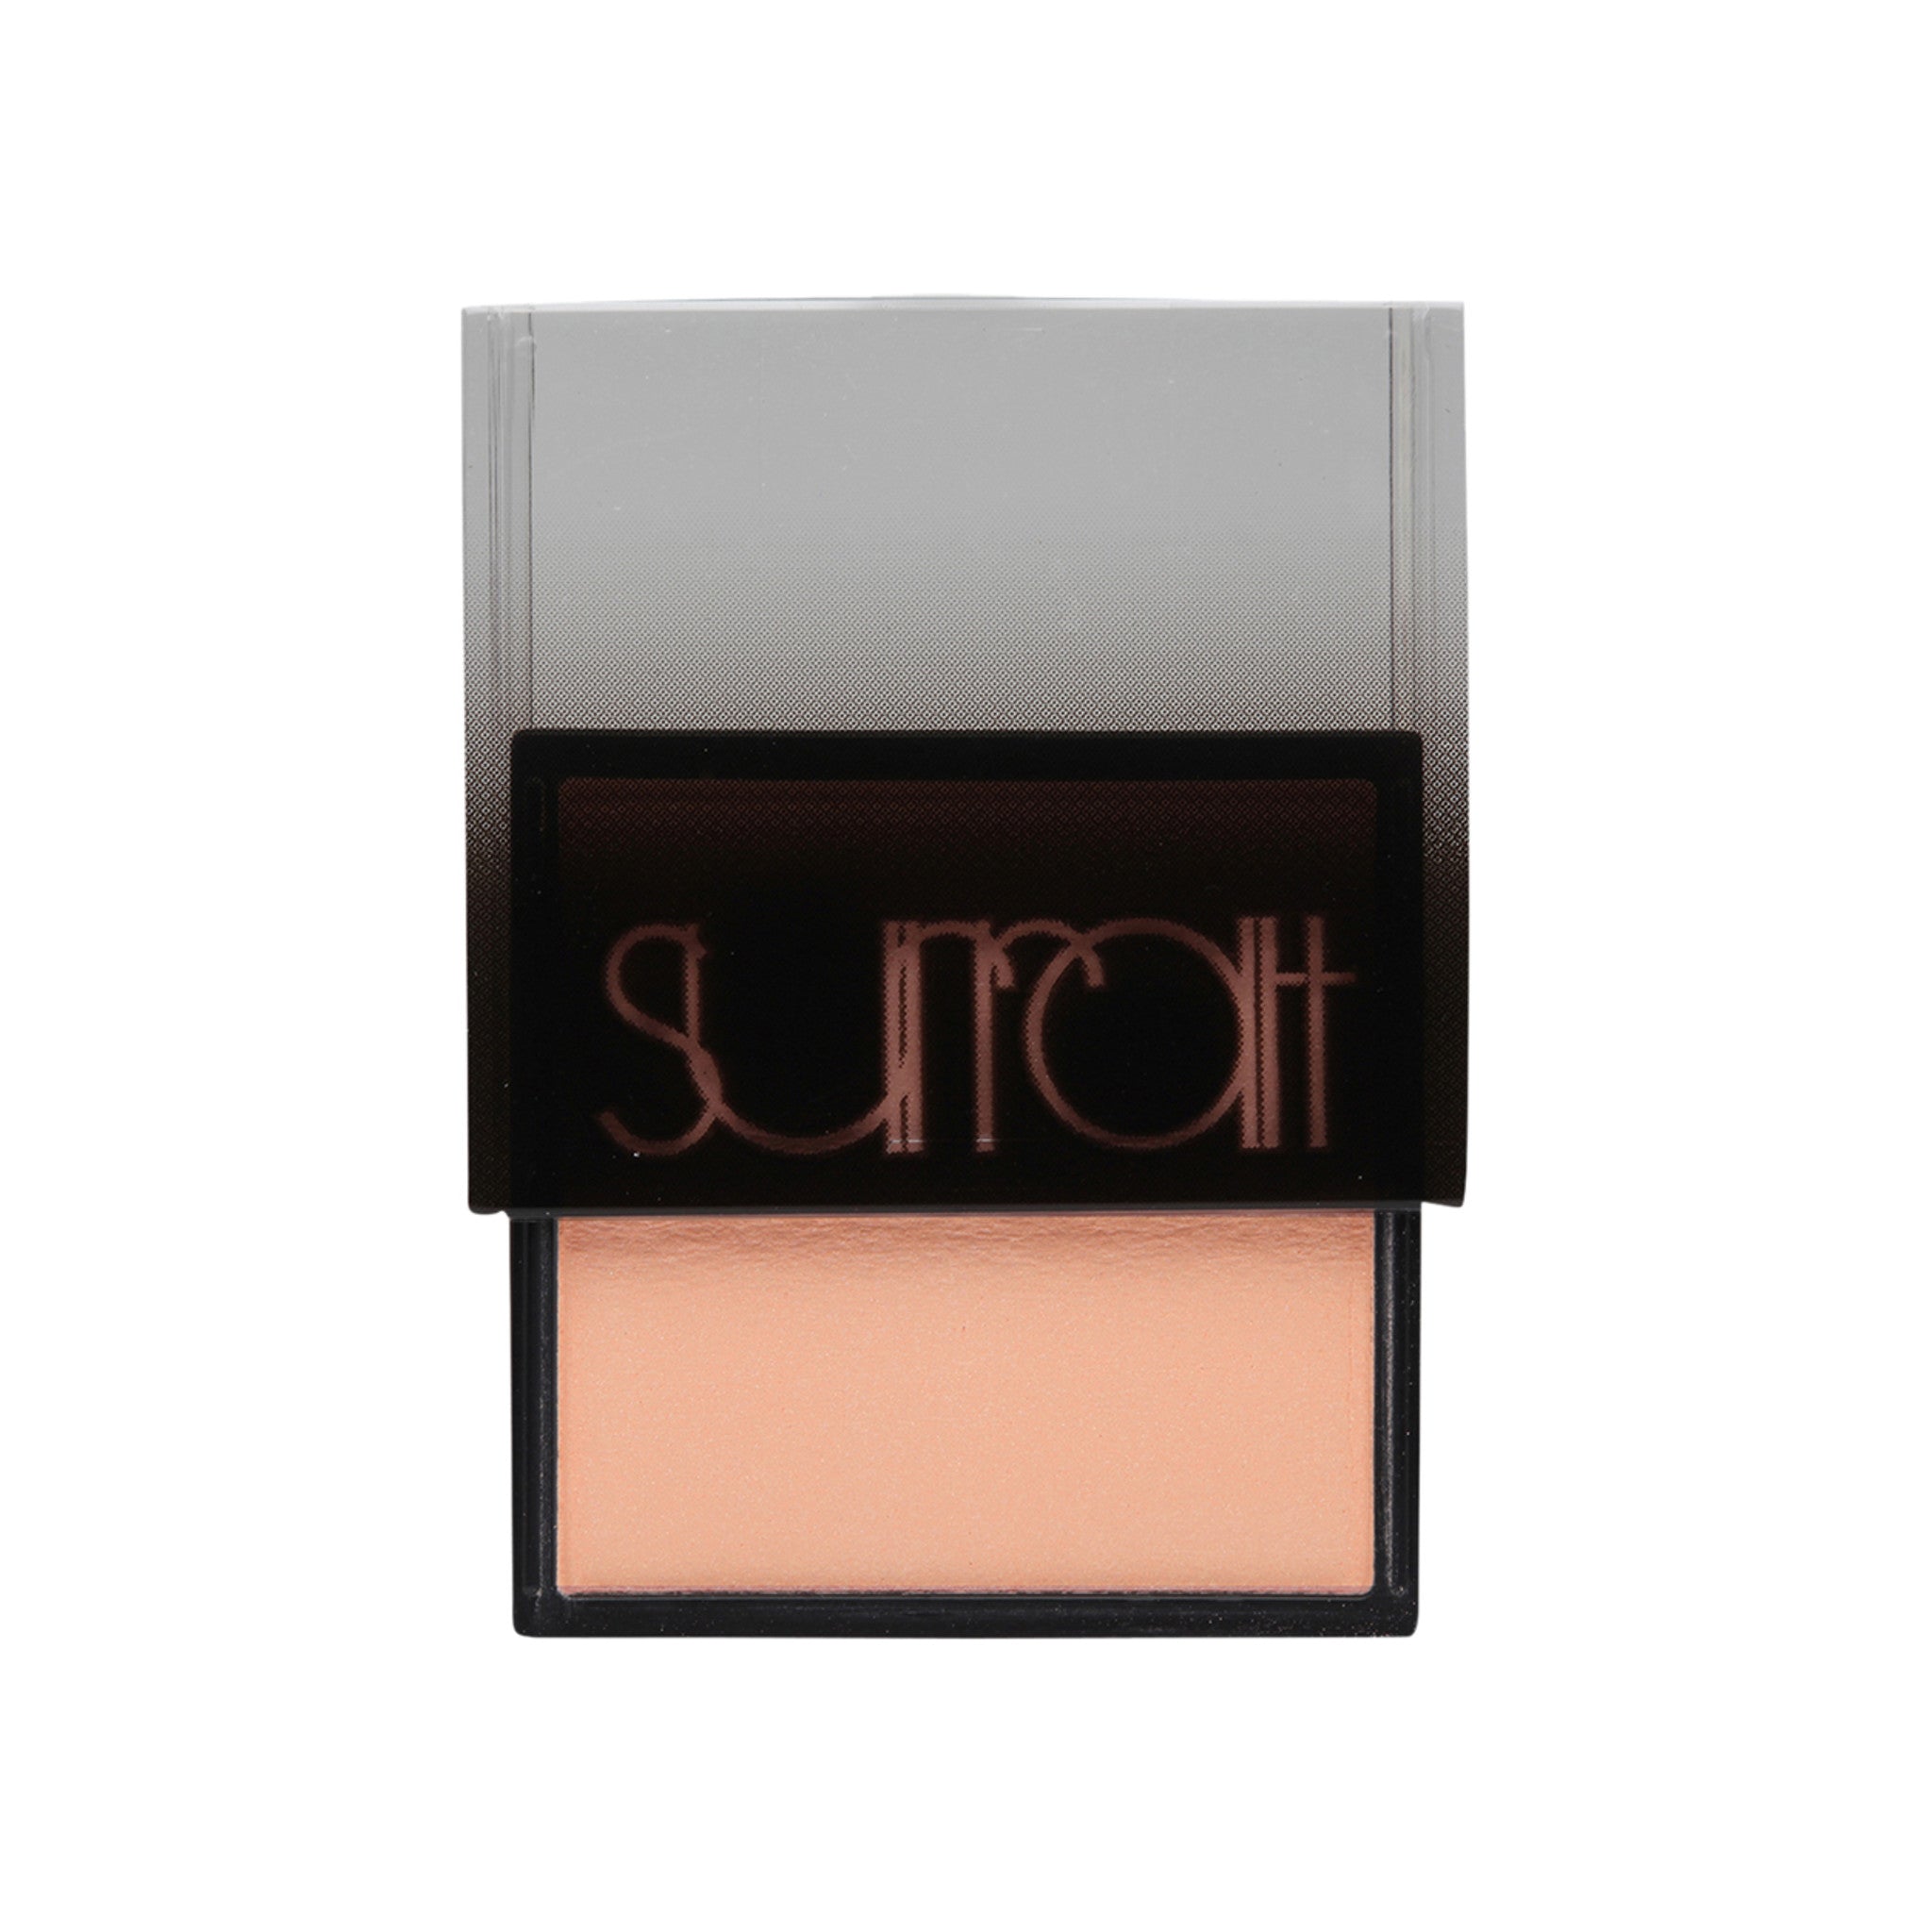 Surratt Artistique Eyeshadow Color/Shade variant: Poudre (Matte Soft Peach) main image. This product is in the color orange